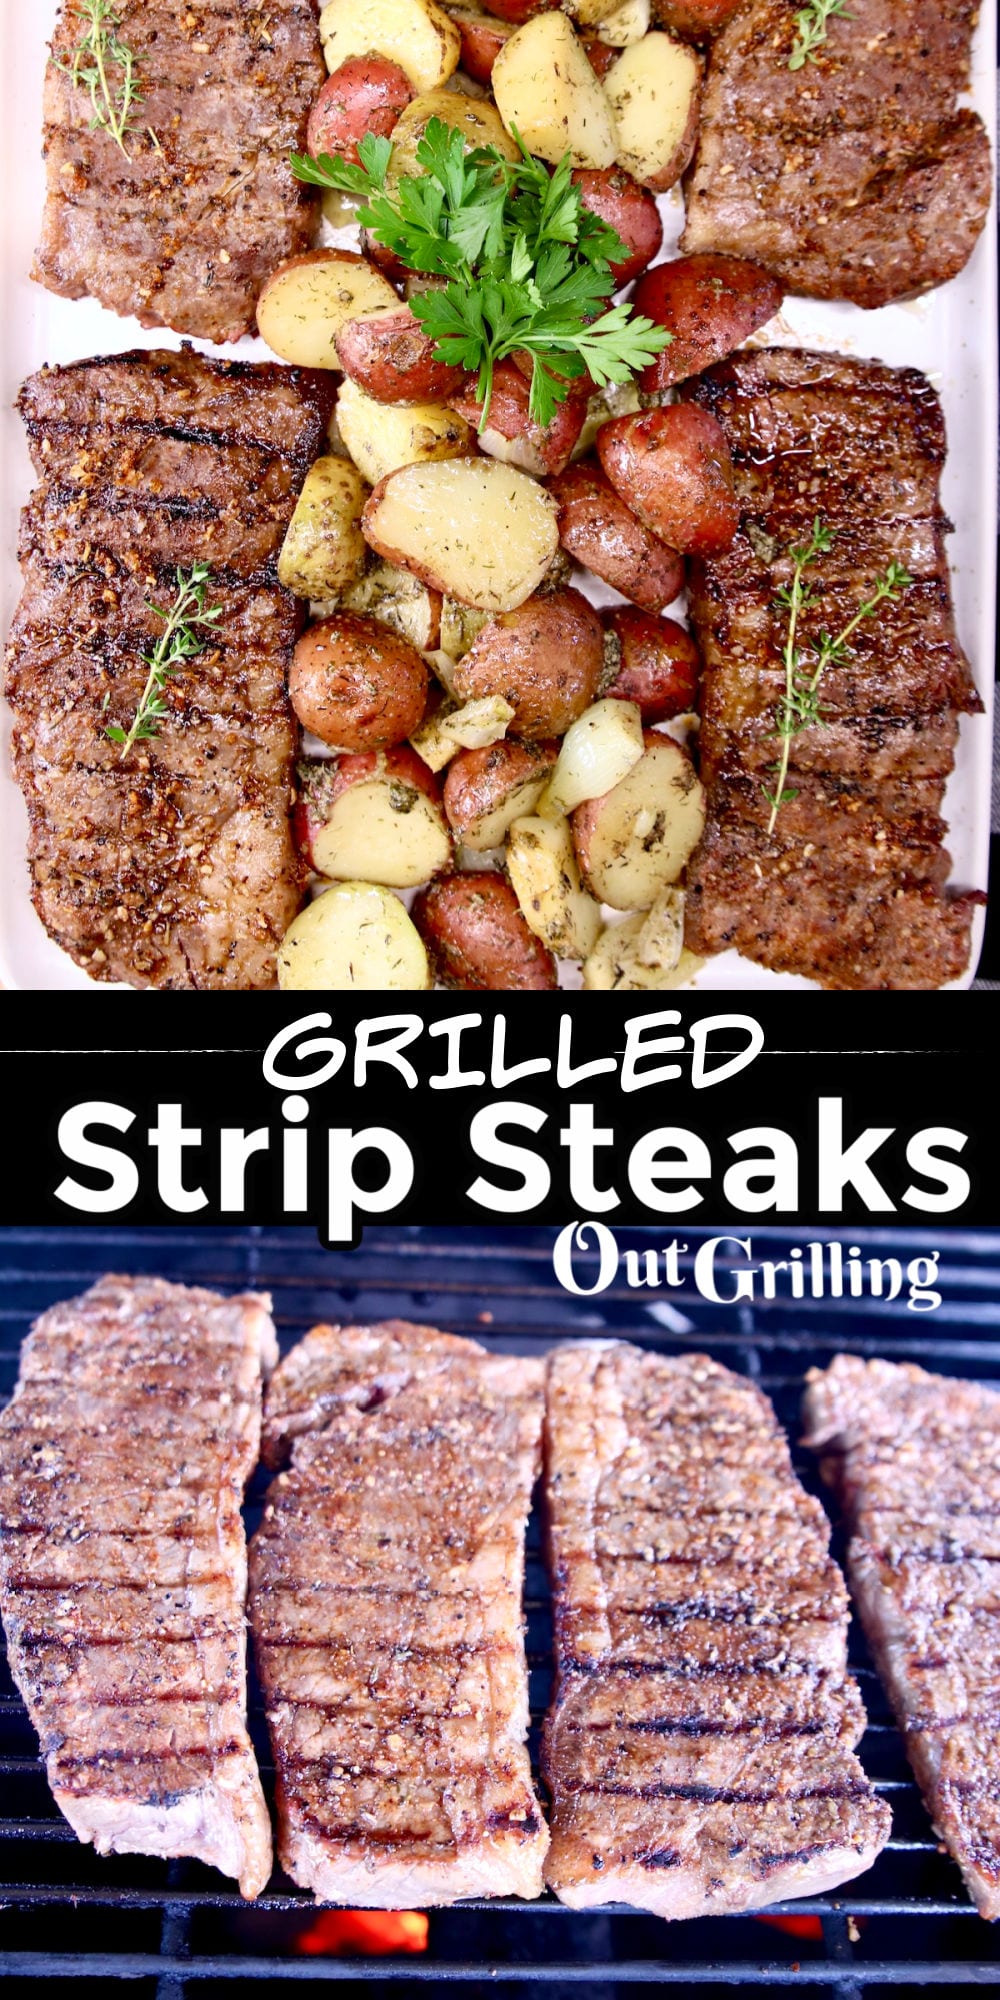 Grilled Strip Steaks - Out Grilling